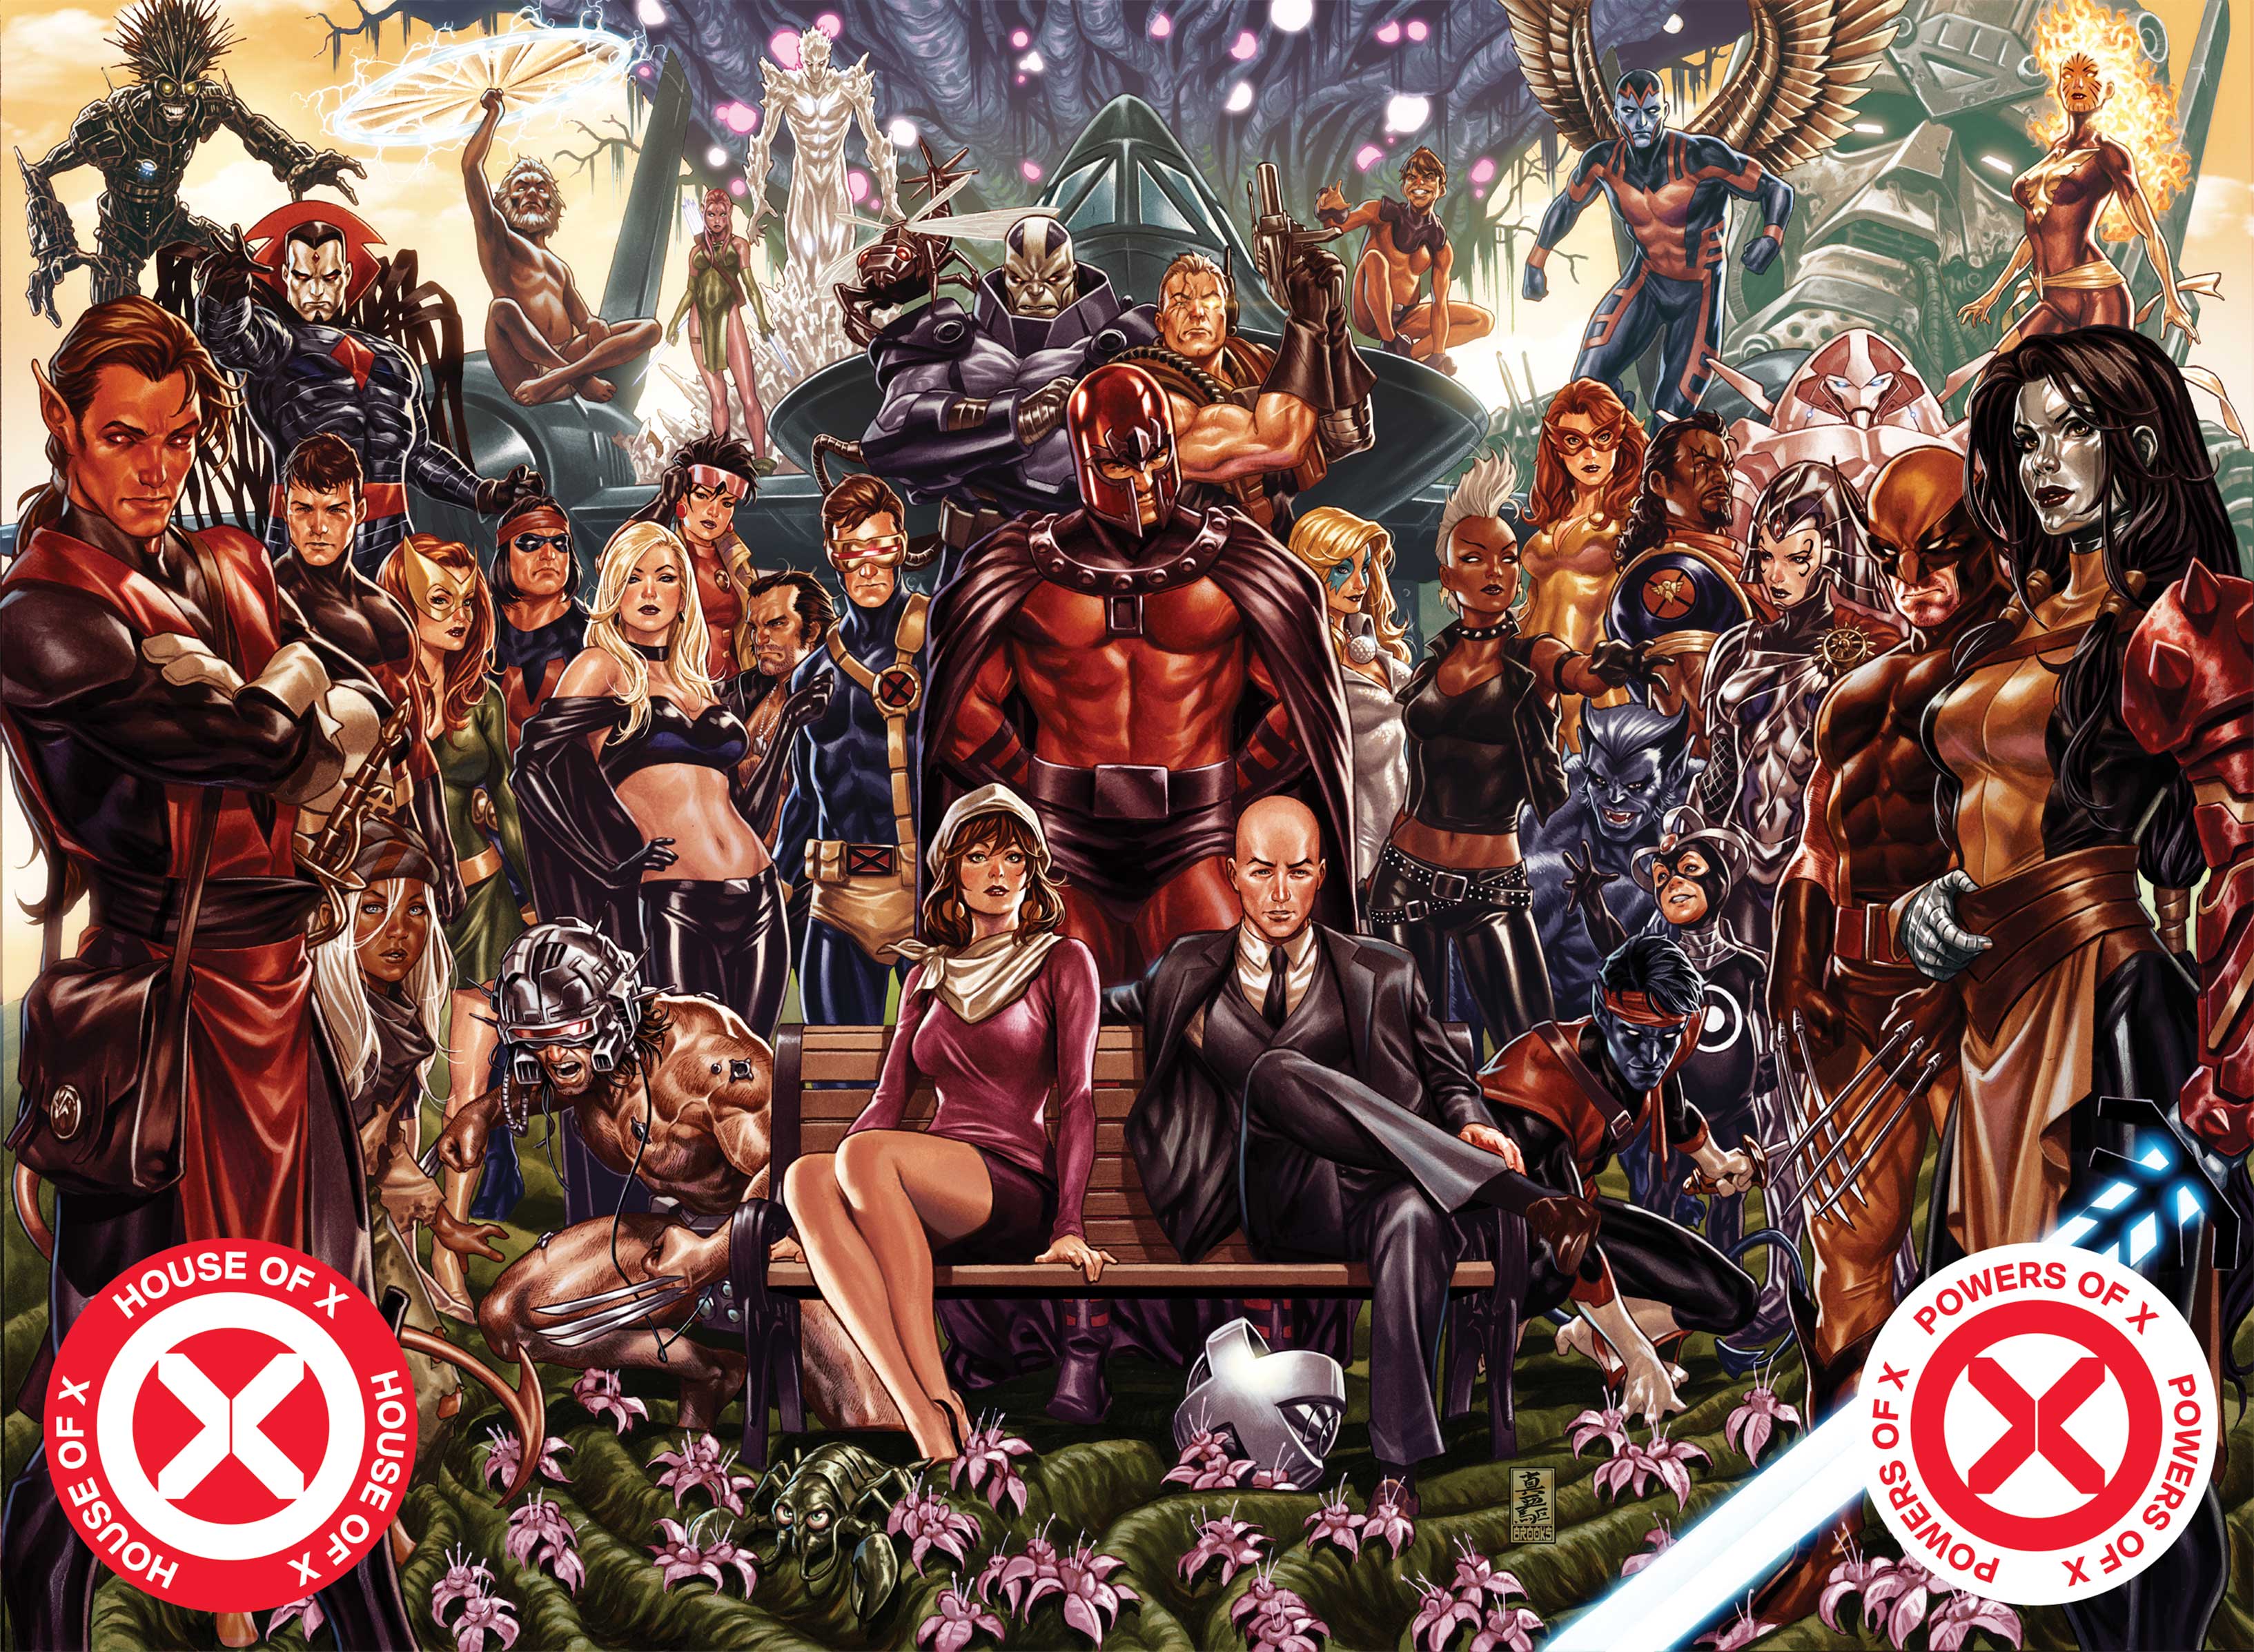 'House of X' and 'Powers of X' getting $50 oversized hardcover collection